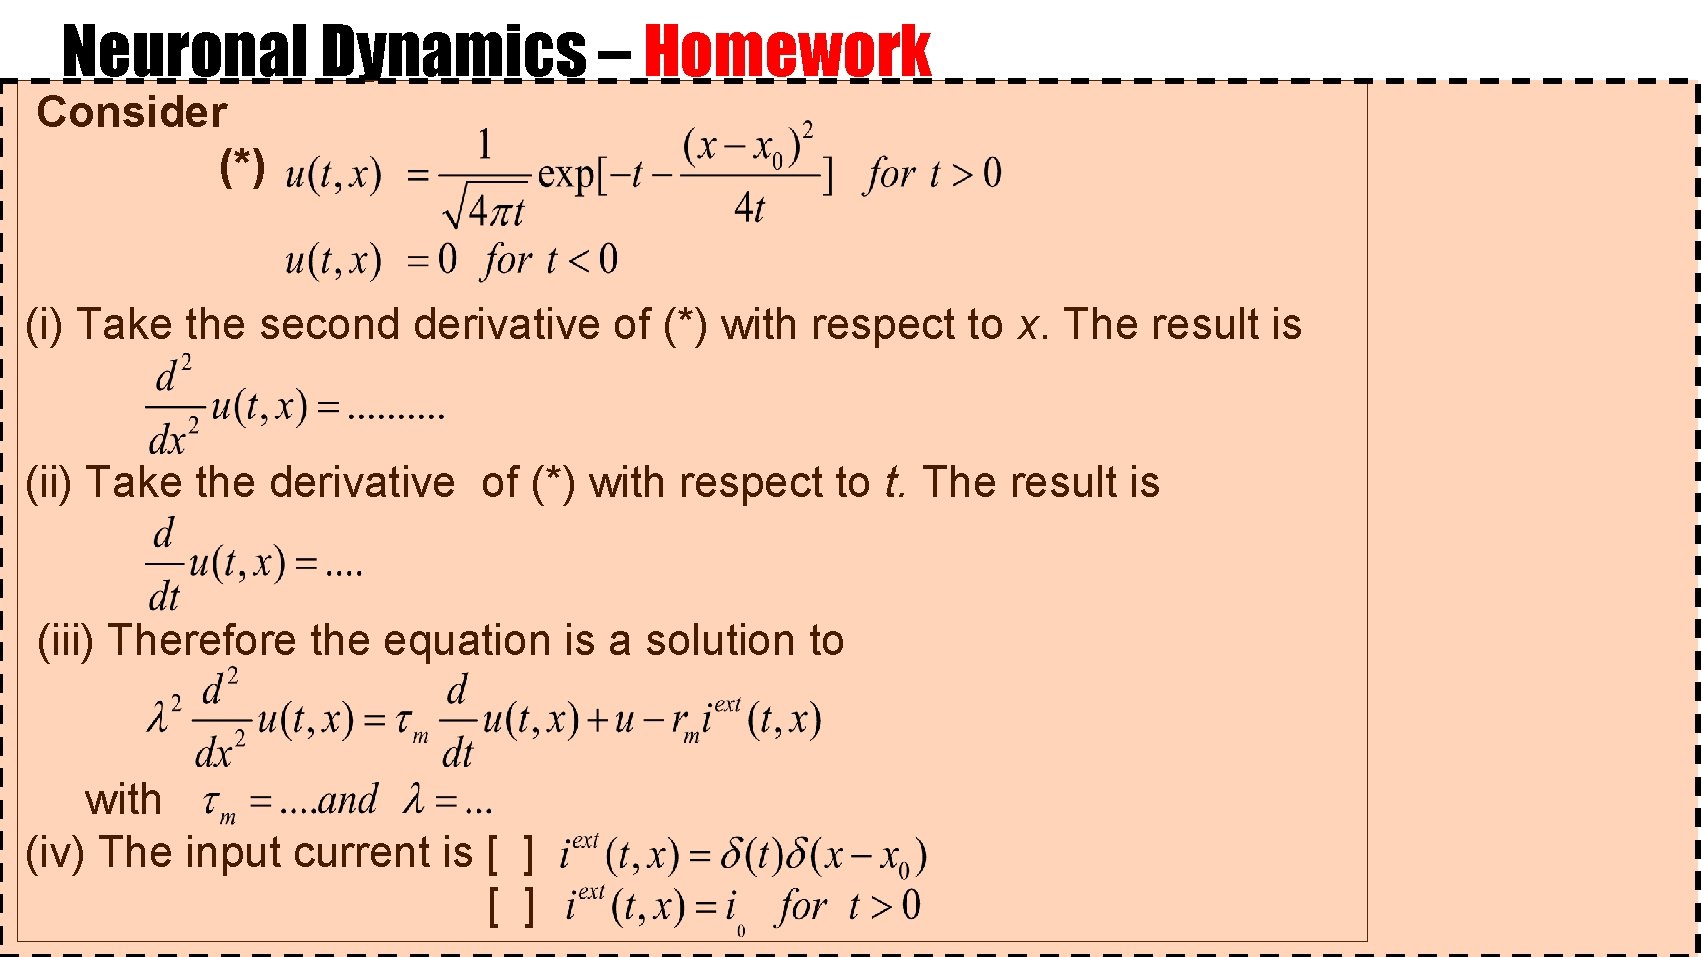 Neuronal Dynamics – Homework Consider (*) (i) Take the second derivative of (*) with